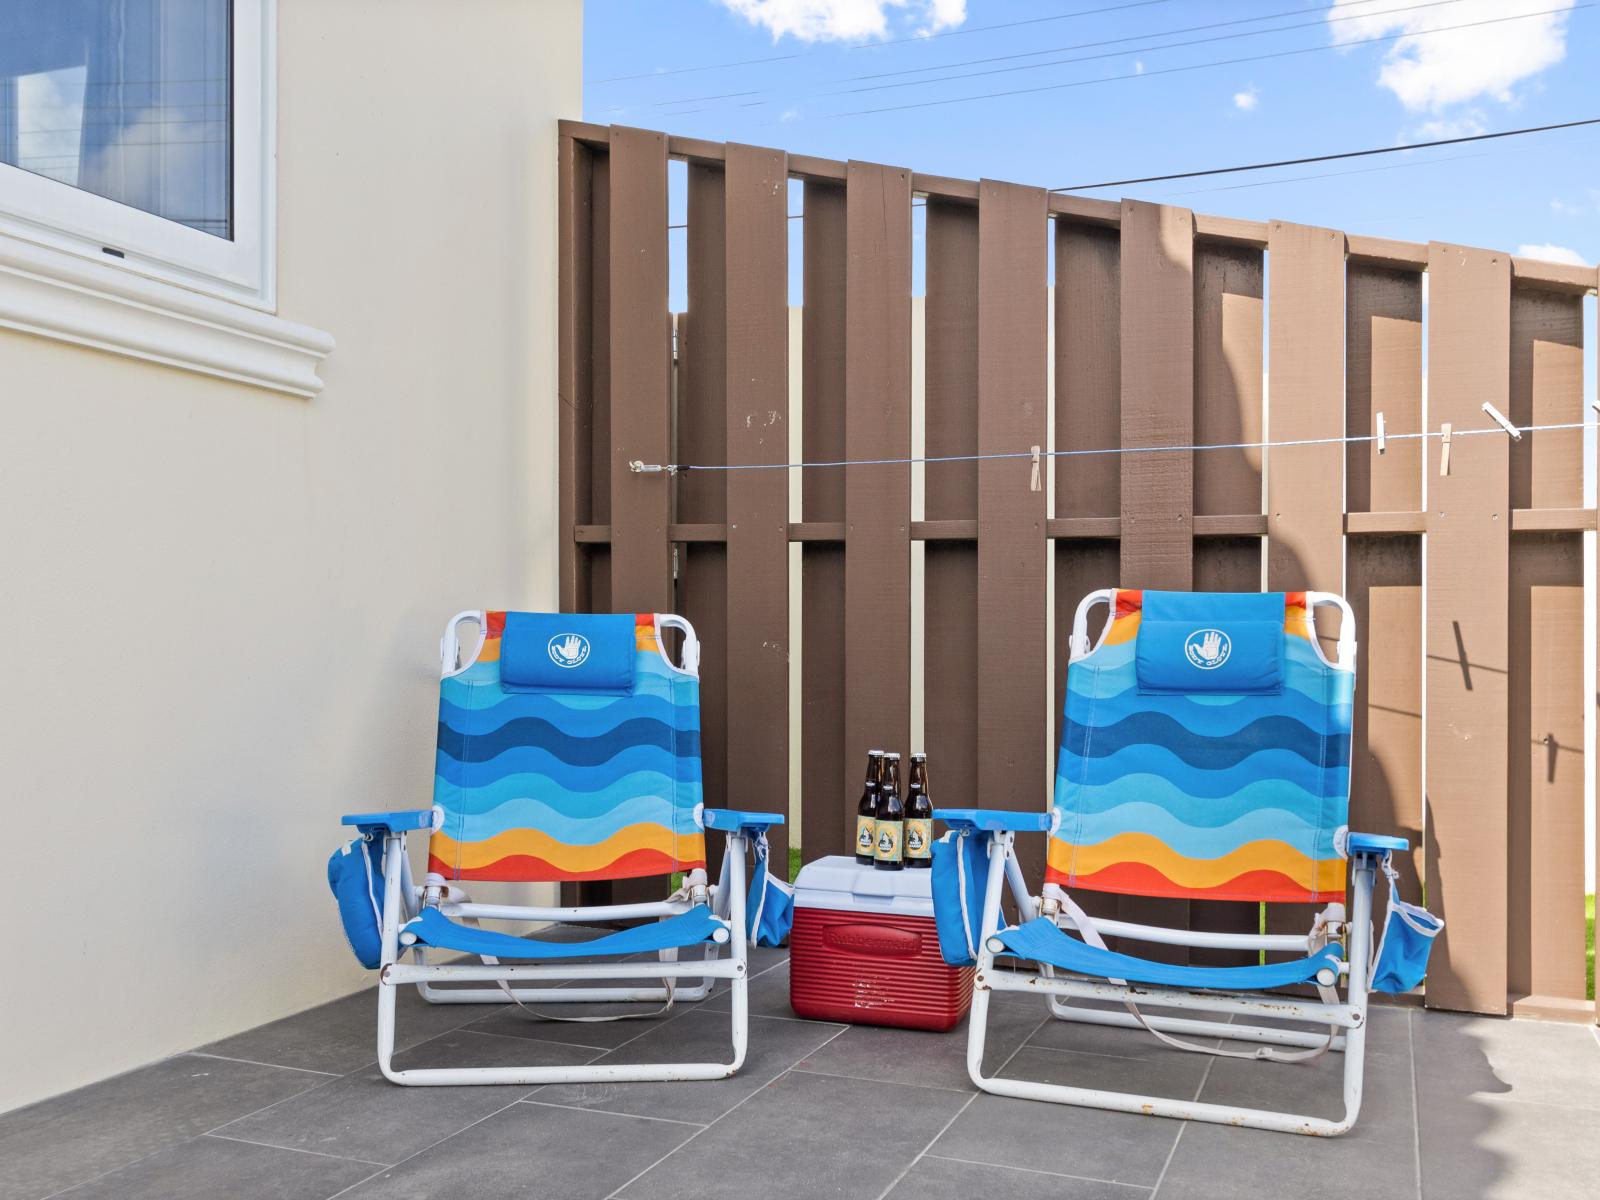 Enjoy ultimate relaxation with our complimentary beach chairs, perfect for lounging by the poolside. - Make the most of your poolside experience with our convenient beach chairs, offering comfort and convenience. - Grab a beach chair and soak up.